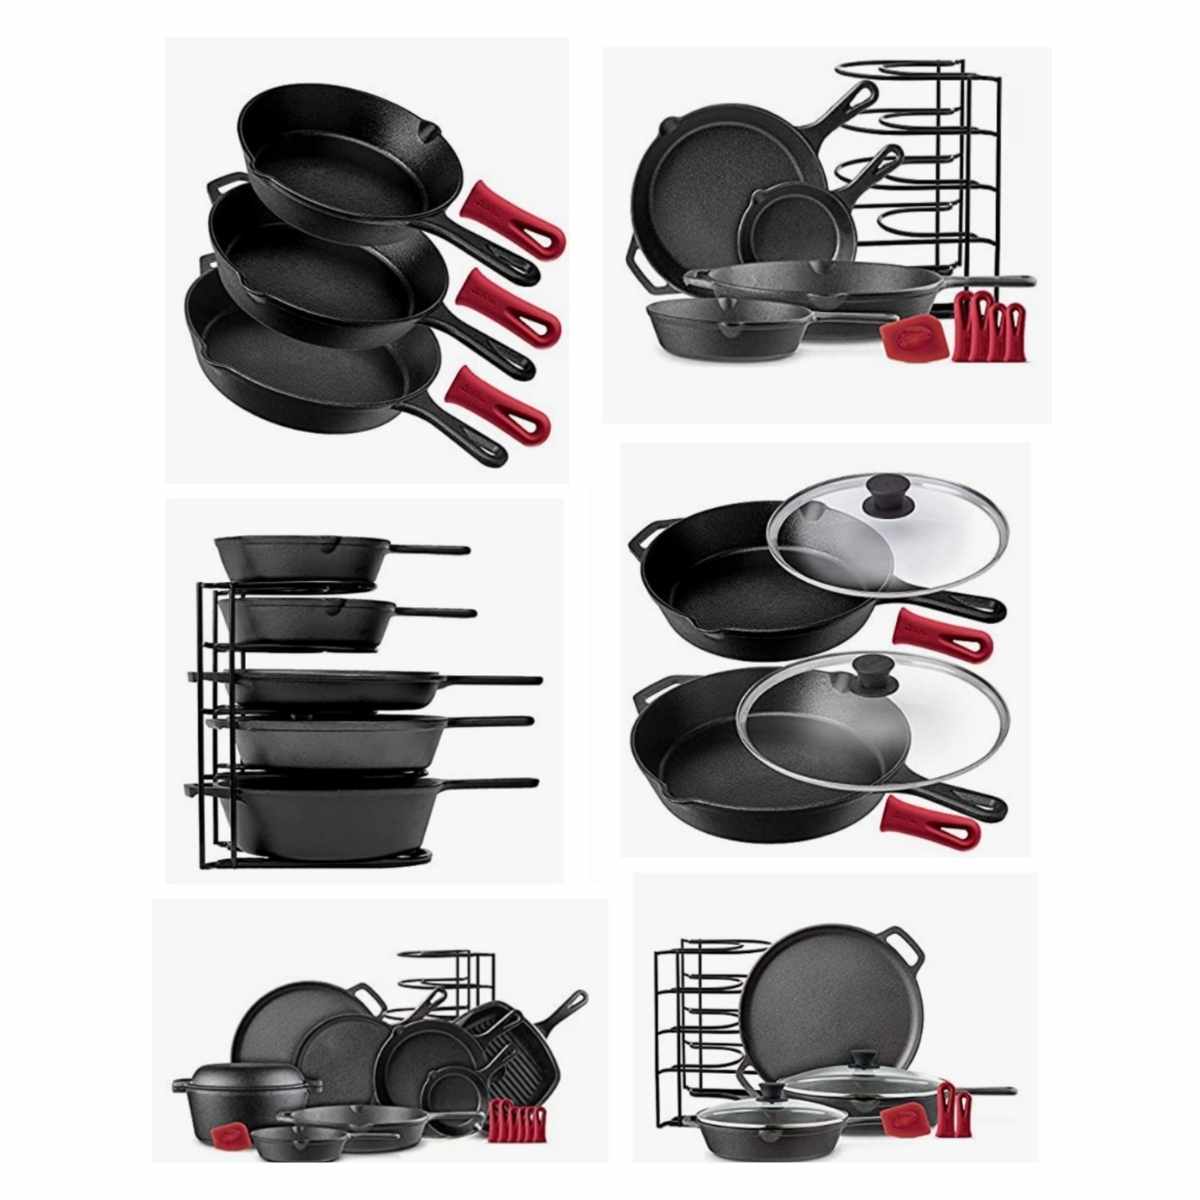 Cuisinel Skillet and Pan Organizer